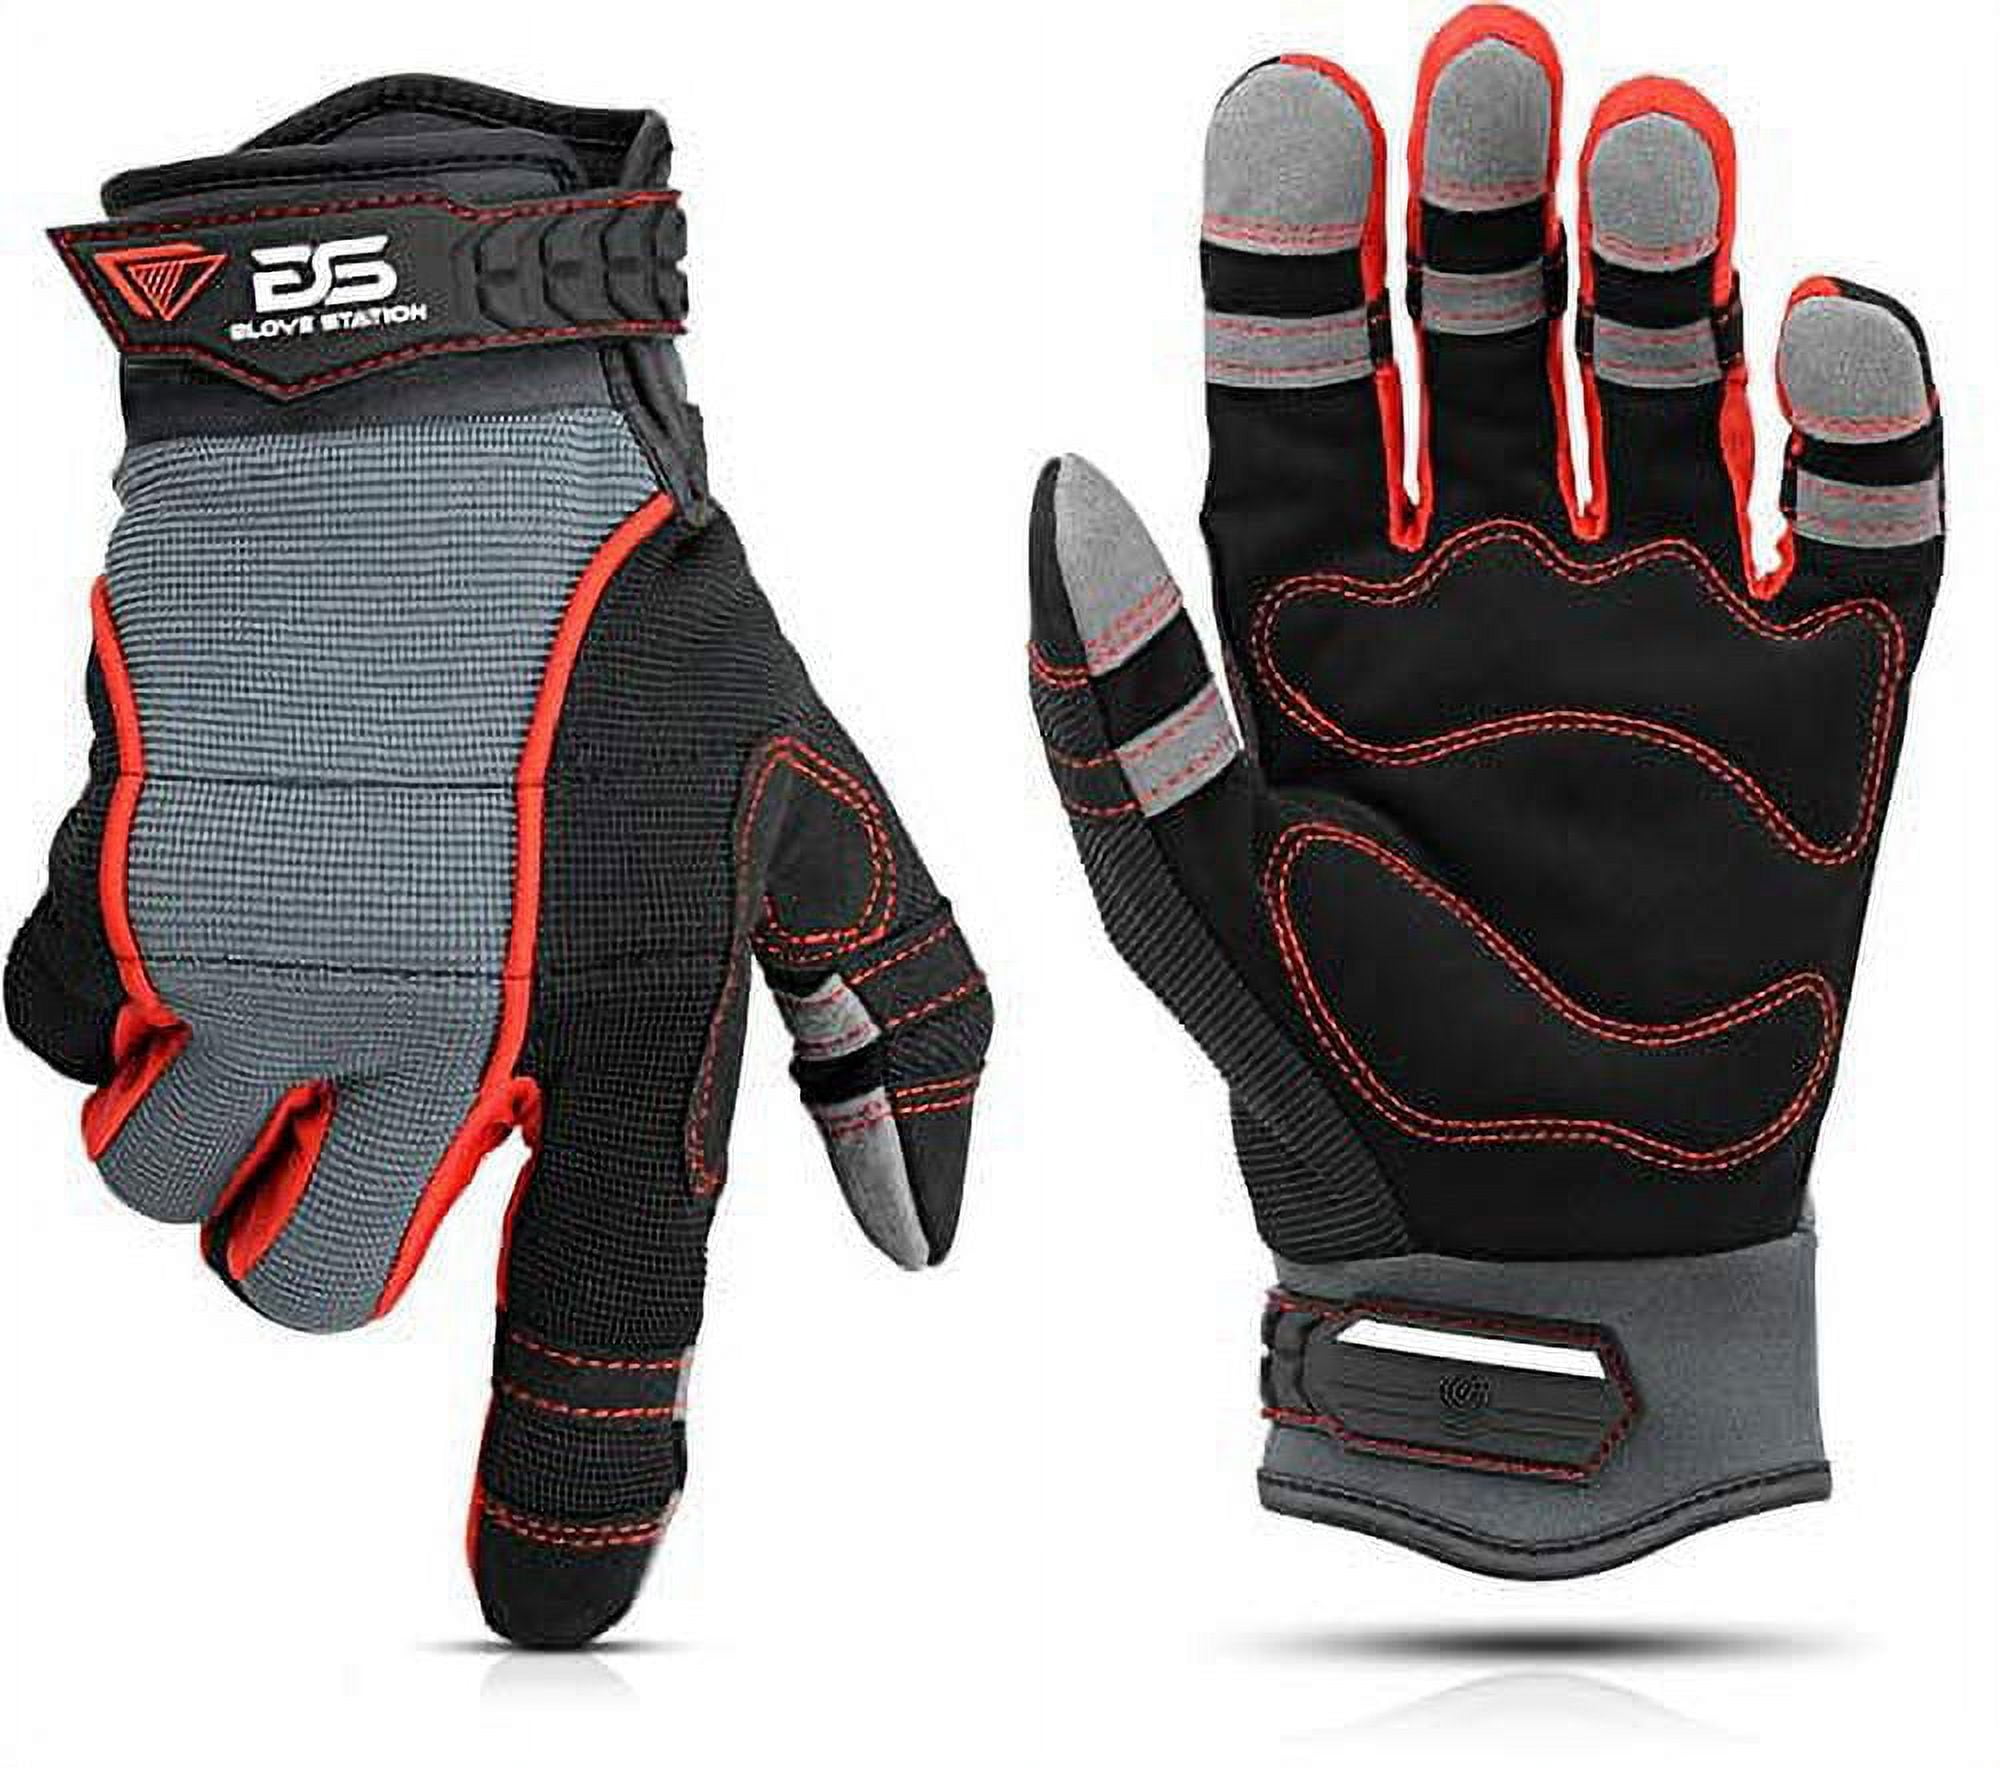  Gorilla Grip Gloves, Max Grip, All Purpose Work Gloves, Slip  Resistant, Nylon Shell, Large, 1 Pair : Clothing, Shoes & Jewelry